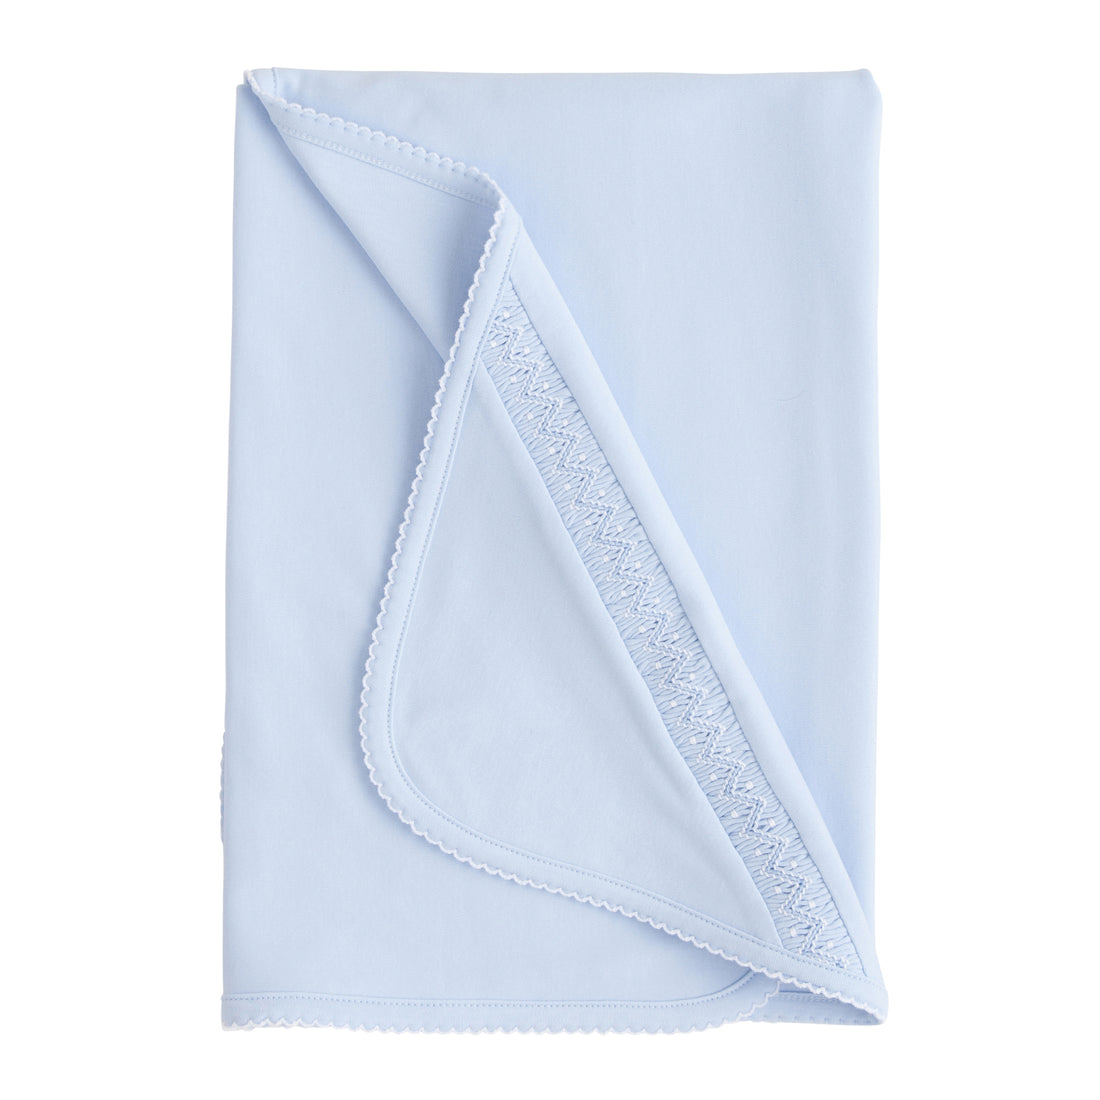 Little English classic receiving blanket for newborns, blue cotton blanket with smocking